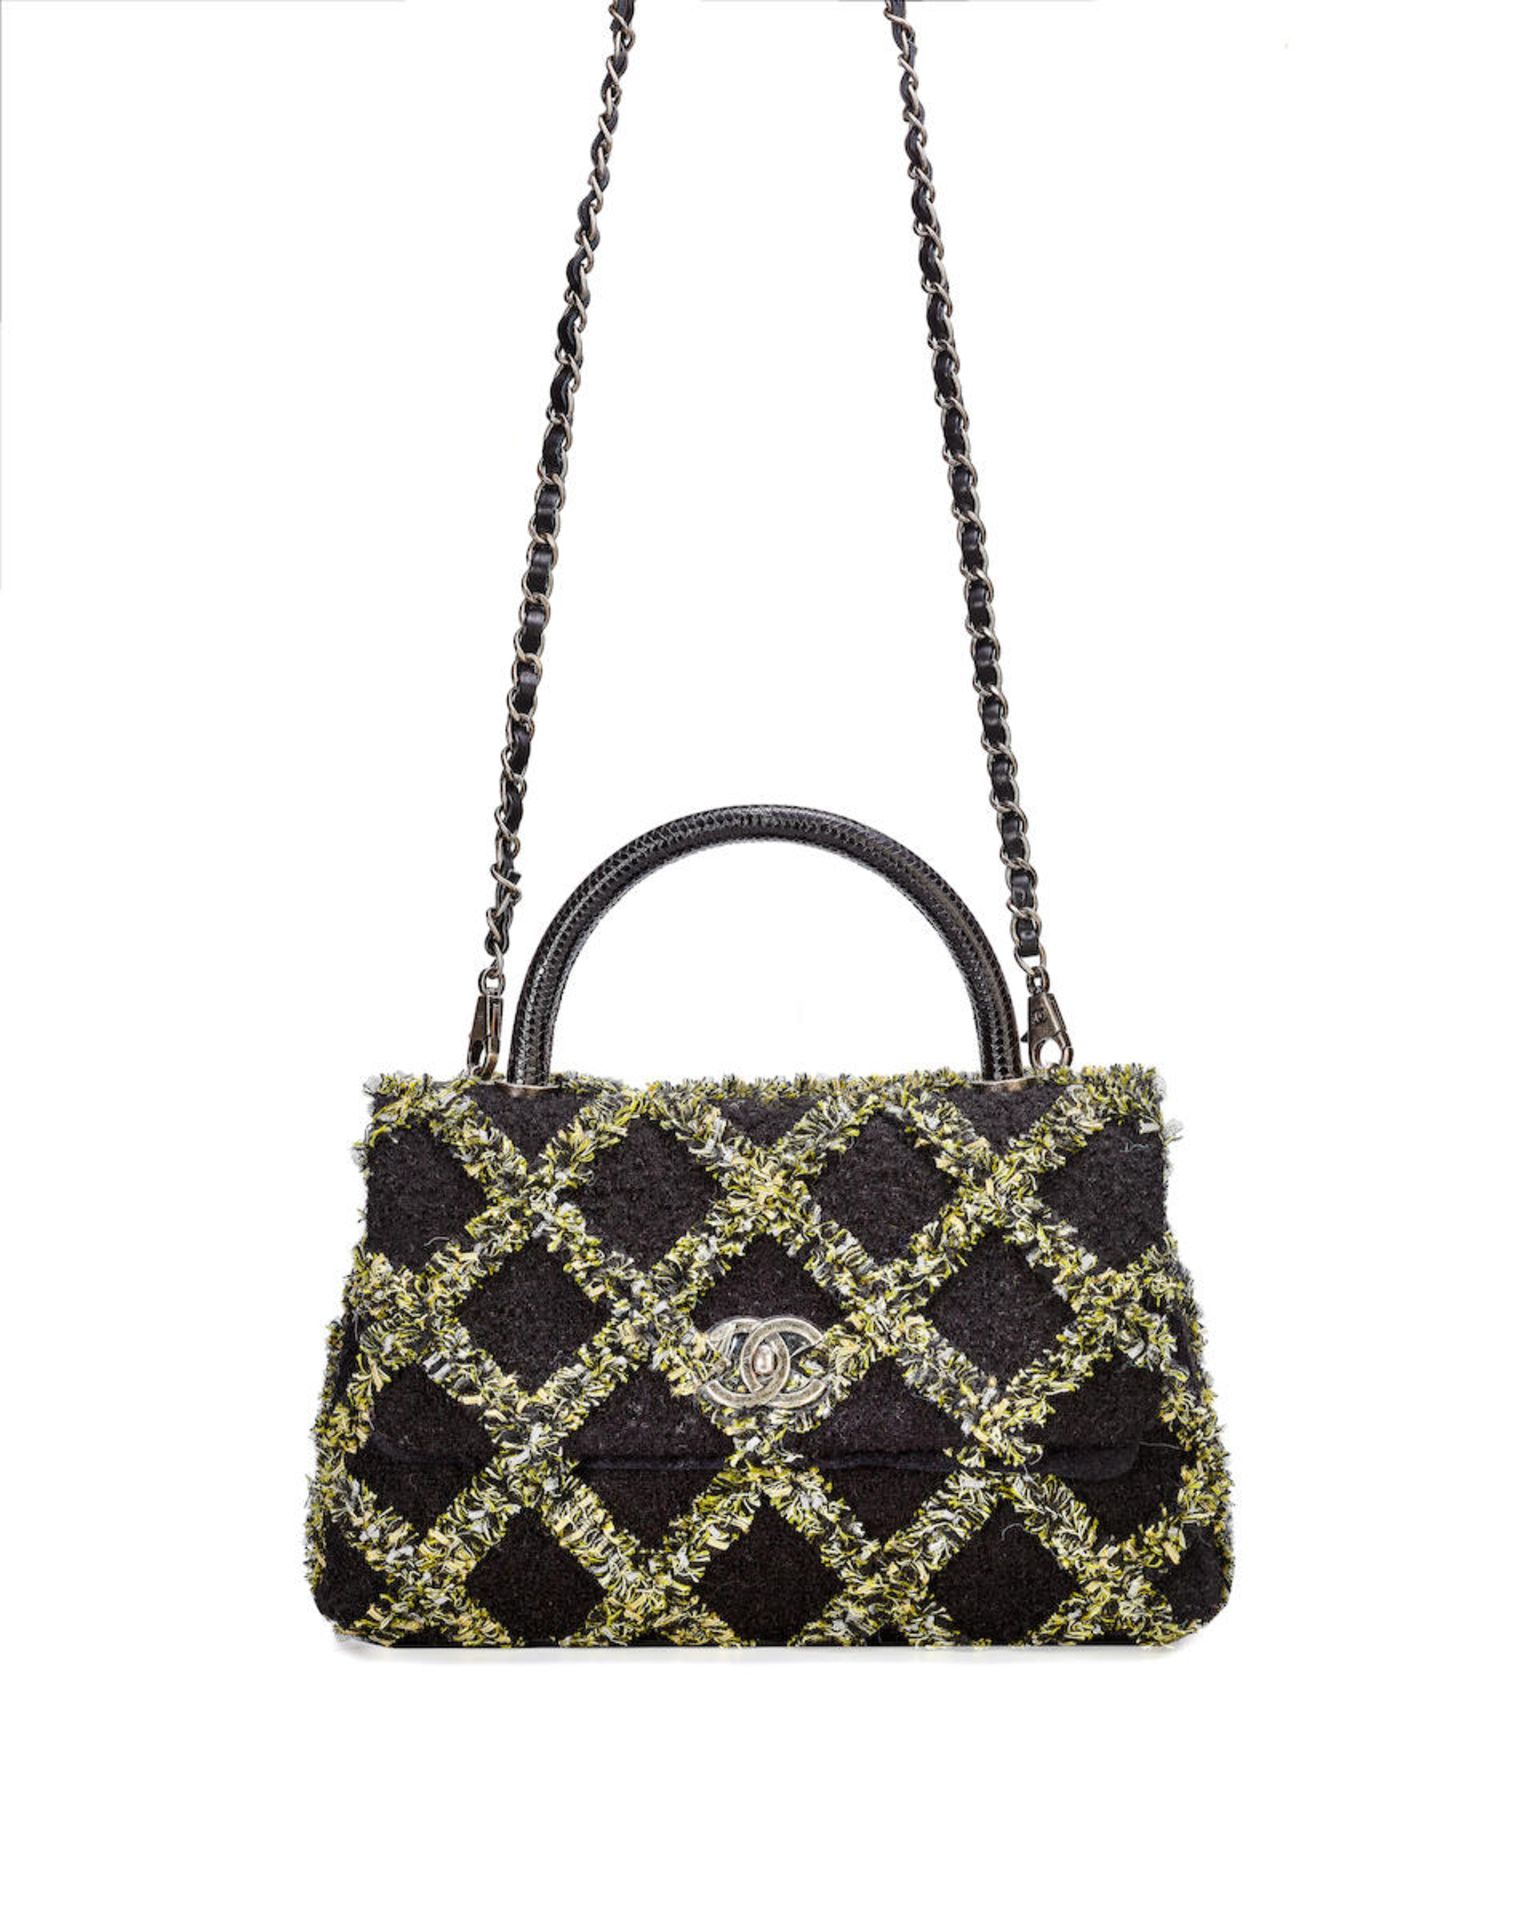 CHANEL: BLACK AND YELLOW TWEED BLACK LIZARD COCO HANDLE FLAG BAG WITH RUTHENIUM HARDWARE (Includ...